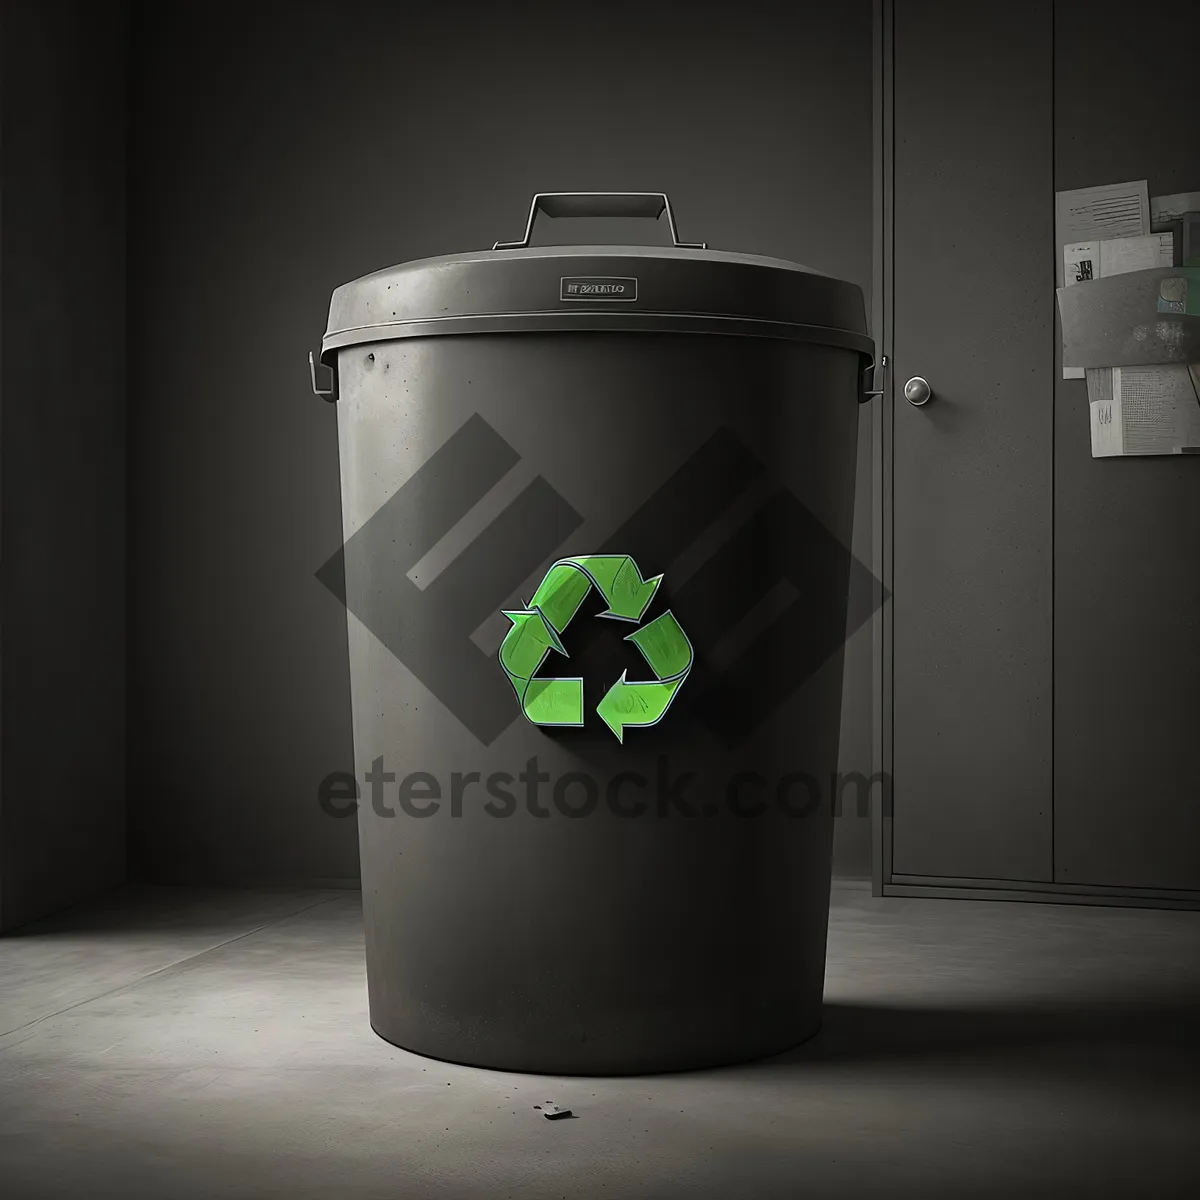 Picture of Ashcan Container - Bin for Waste Management